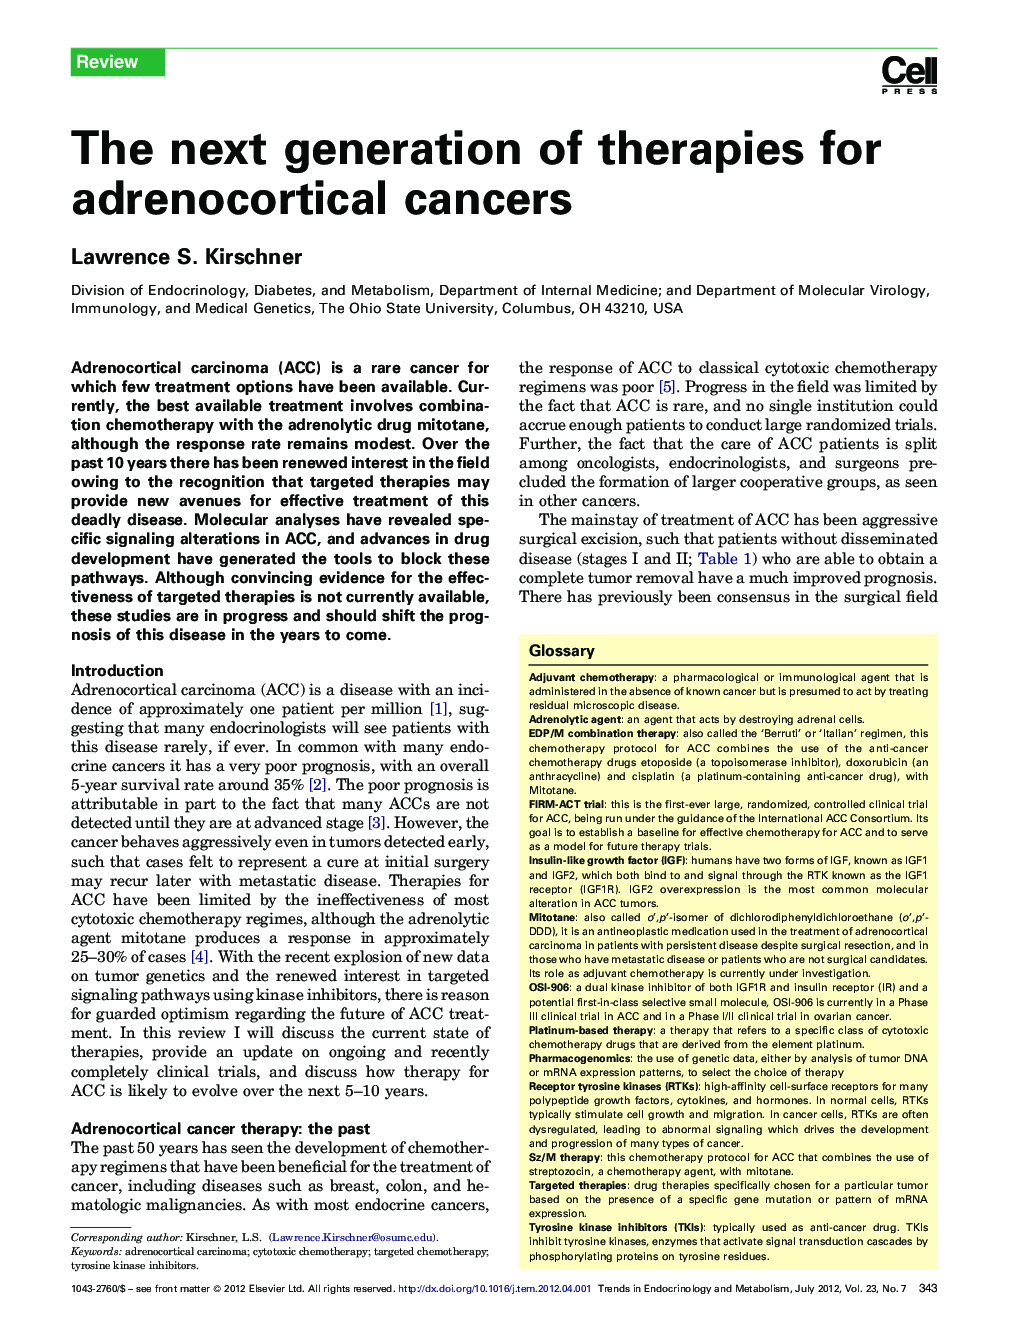 The next generation of therapies for adrenocortical cancers